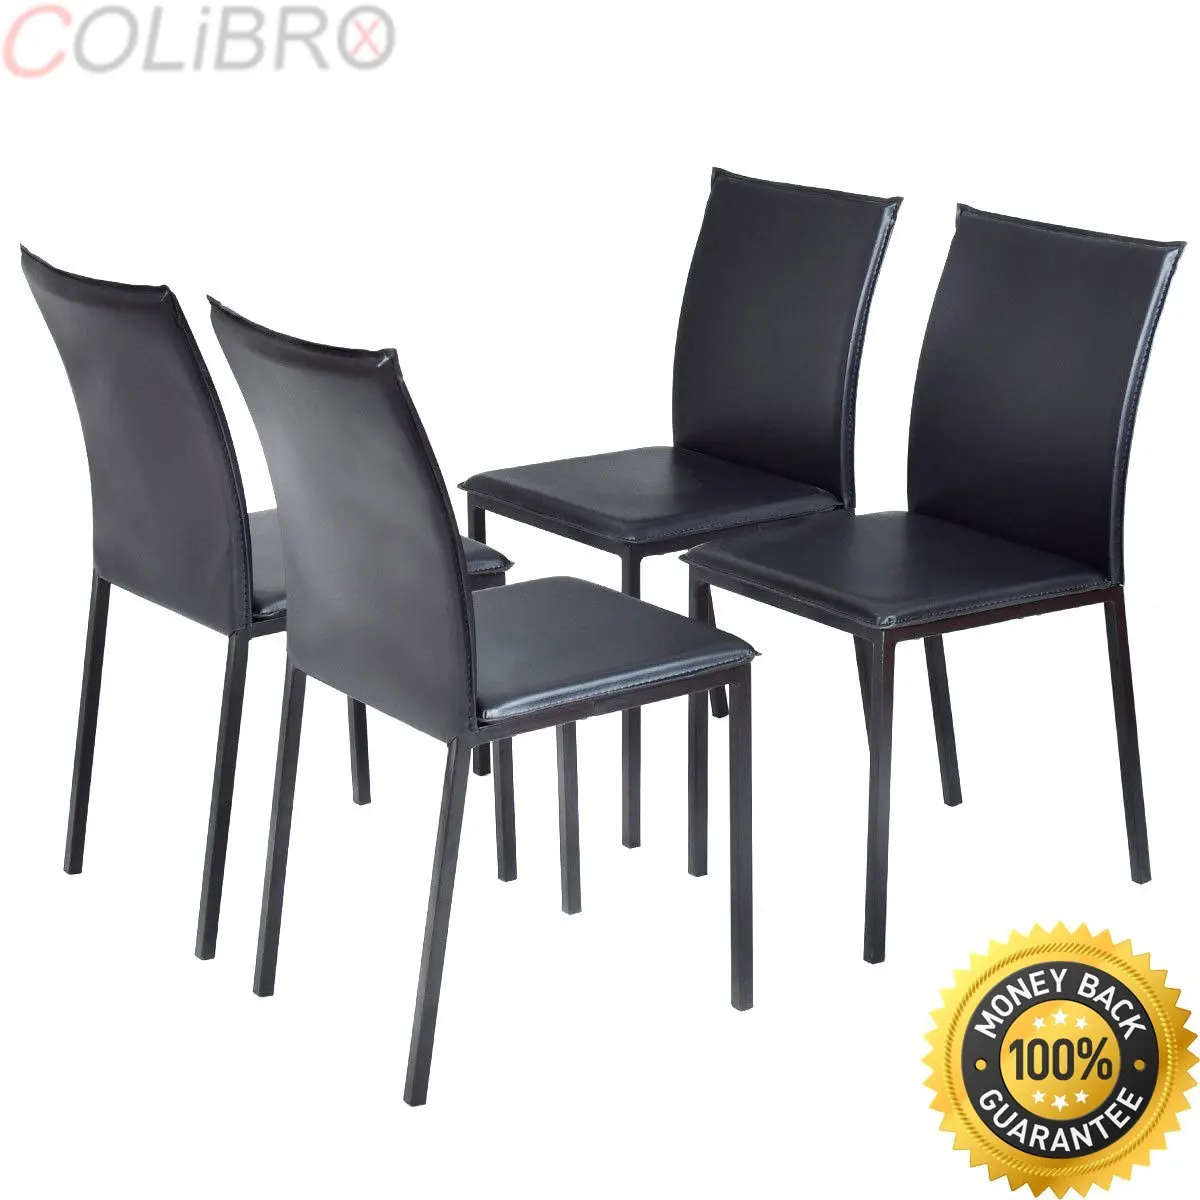 Cheap Dining Chairs Metal Find Dining Chairs Metal Deals On Line At Alibaba Com